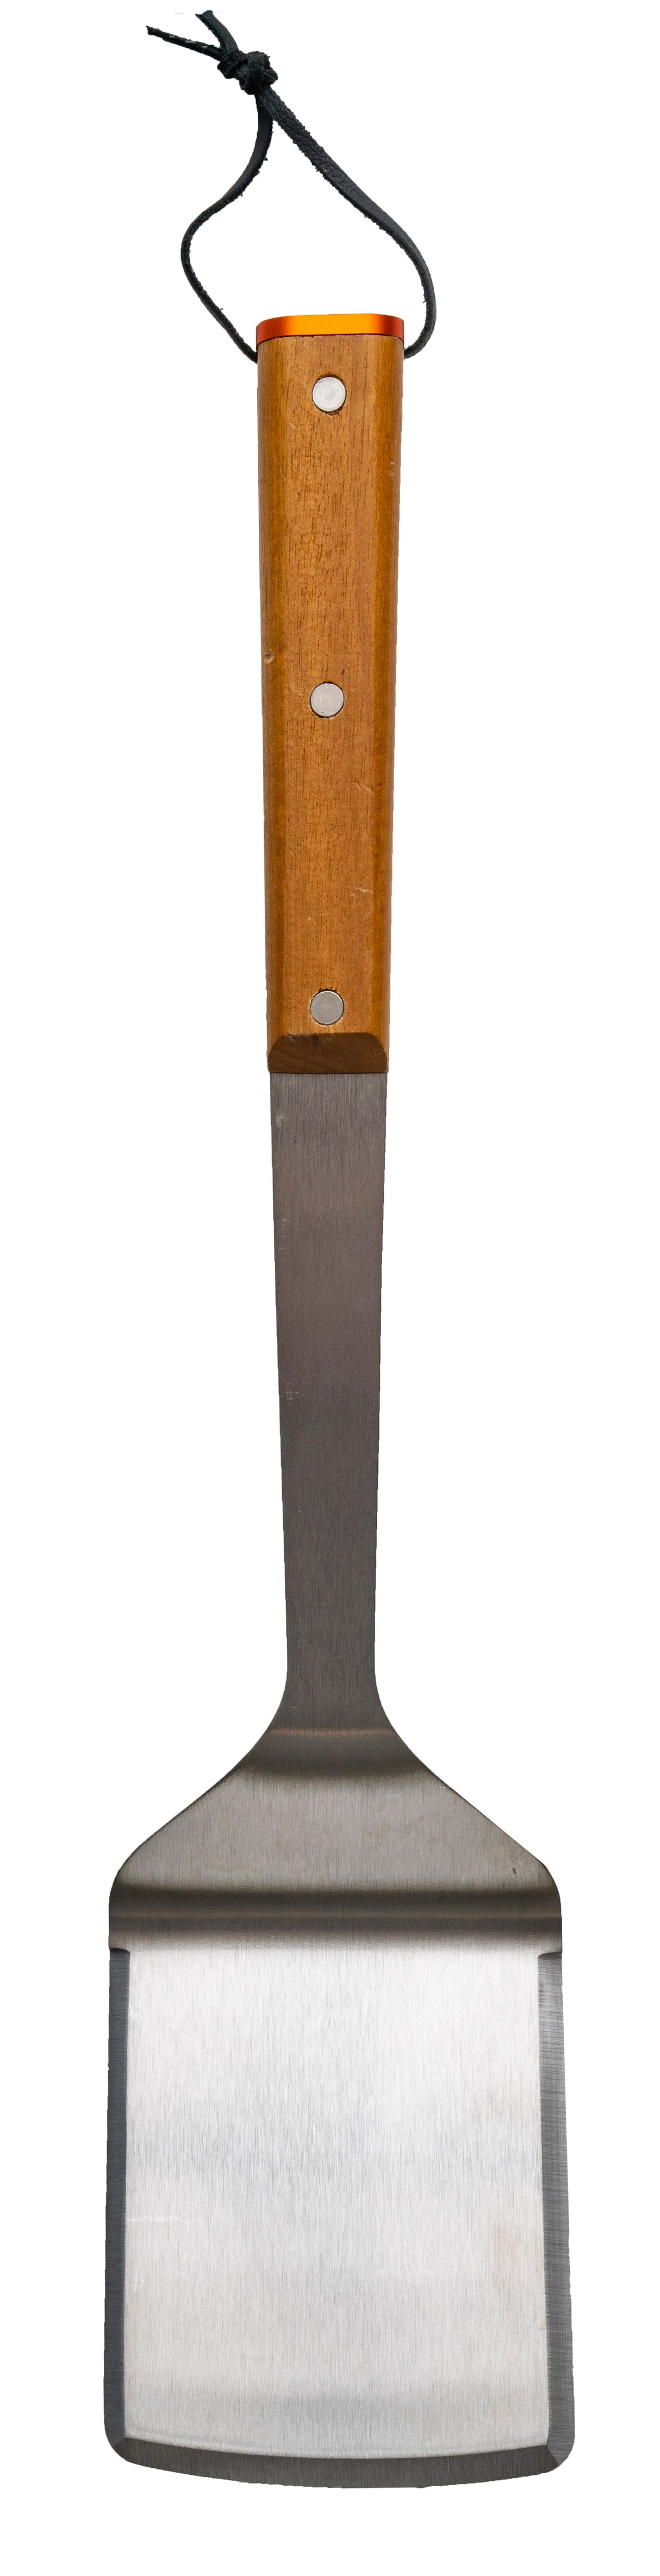 Stainless Steel BBQ Spatula